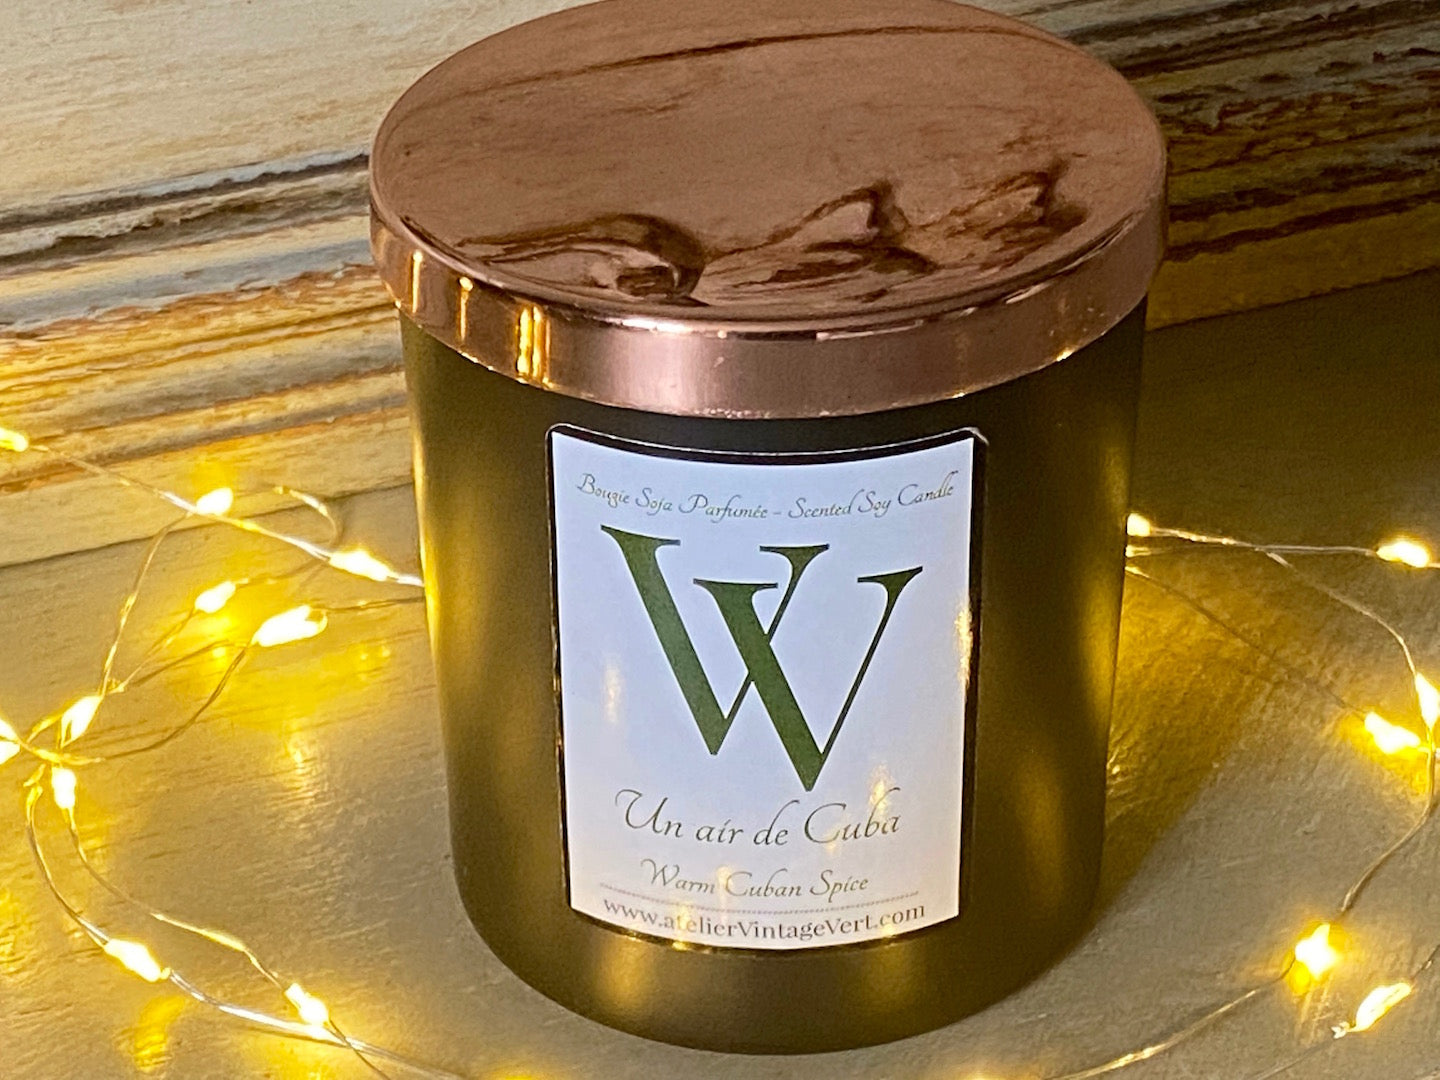 Soy Candle - Warm Cuban Spice